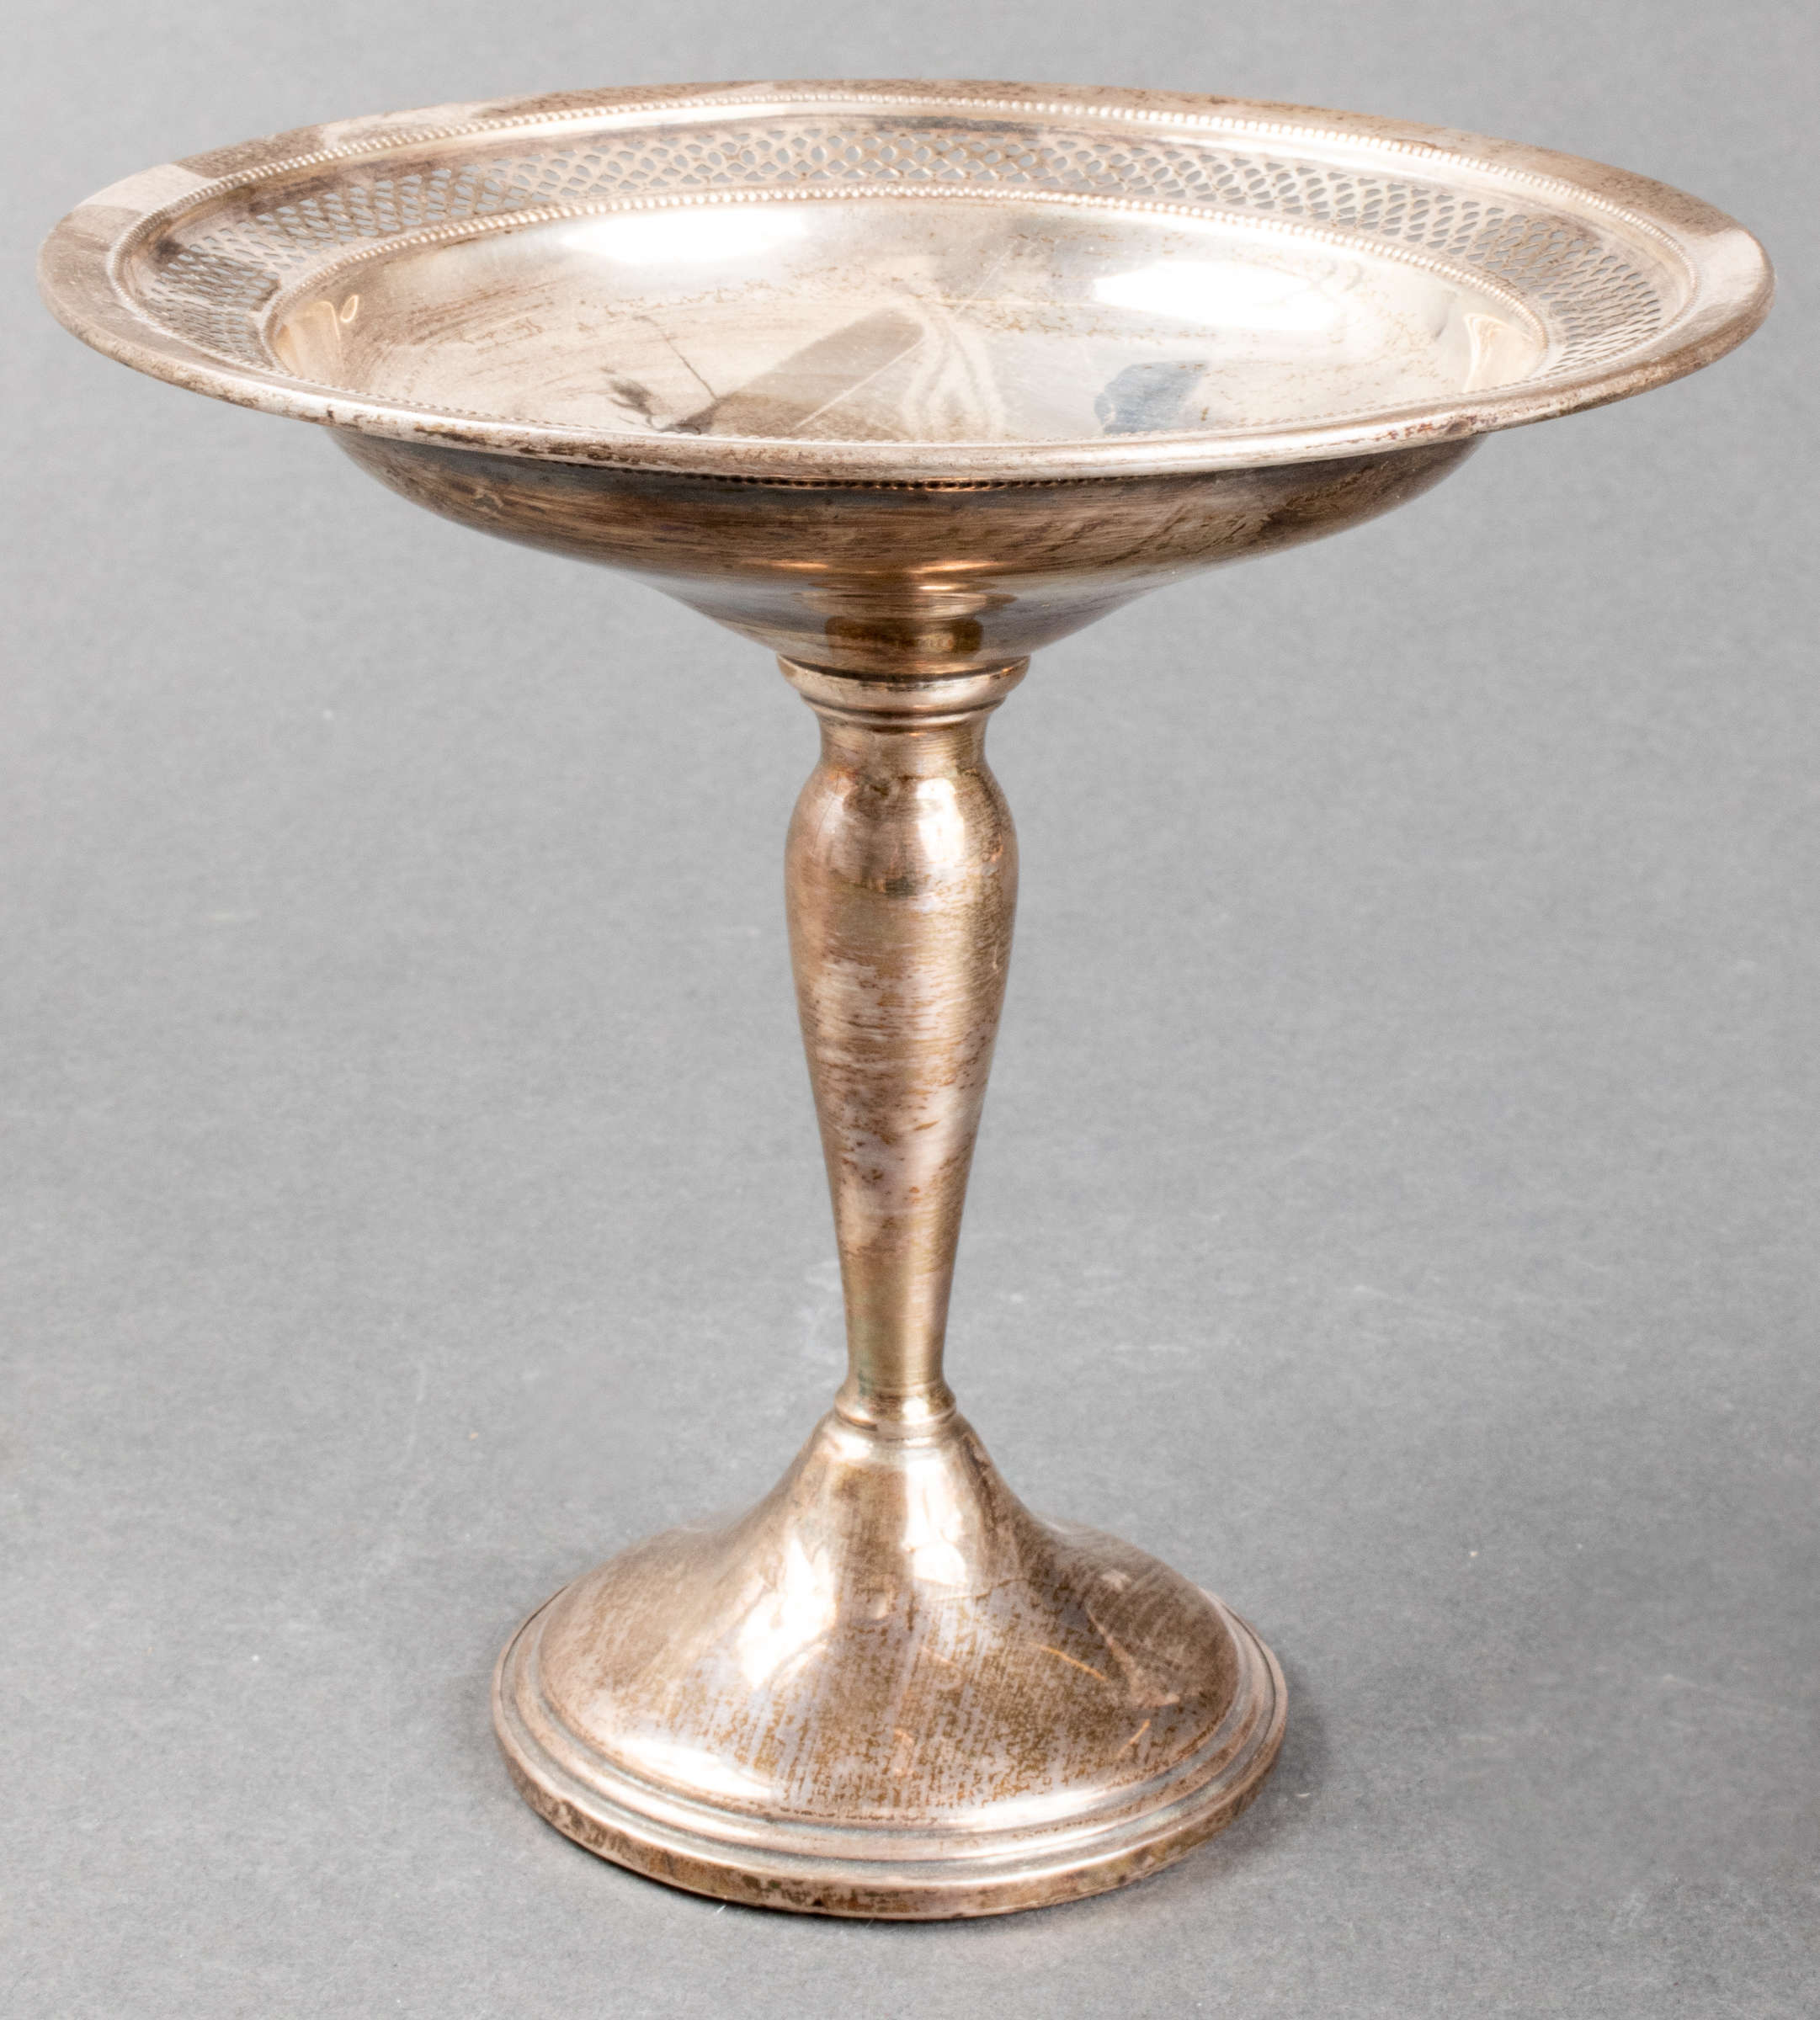 EL-SIL-CO STERLING SILVER COMPOTE